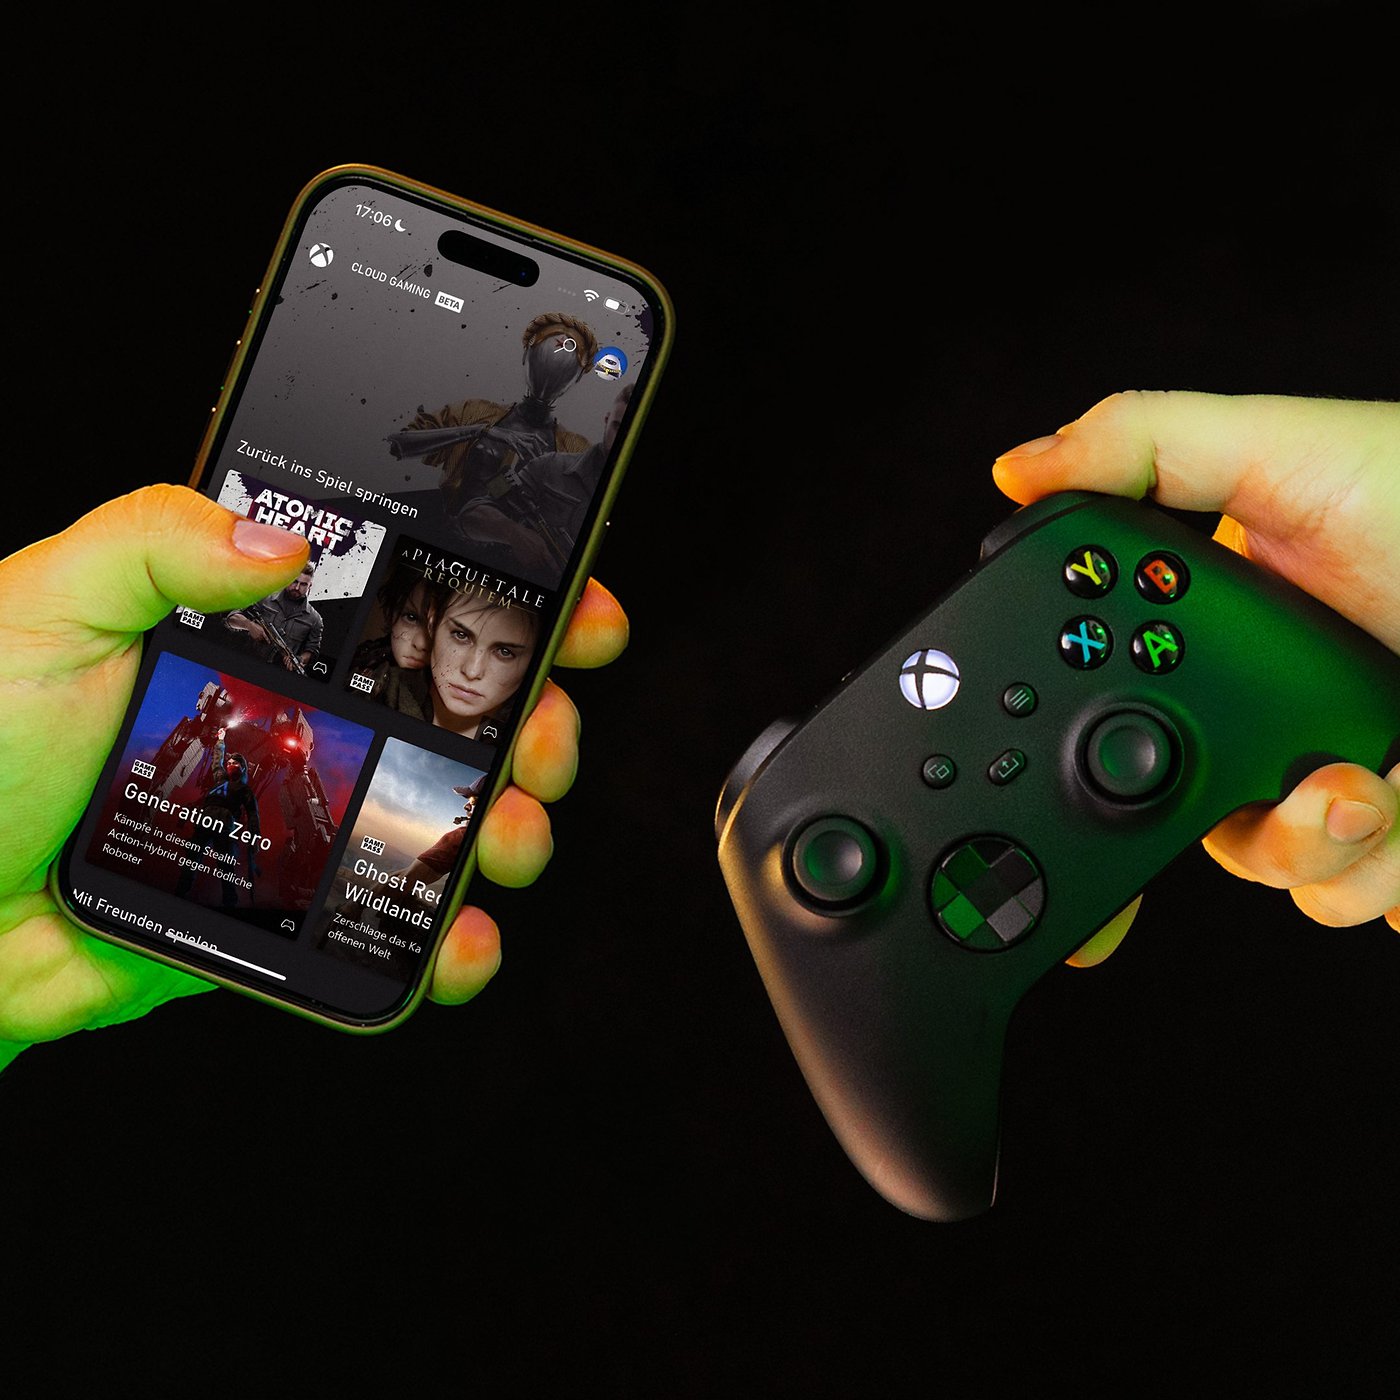 How to Play Xbox Games on Your iPhone